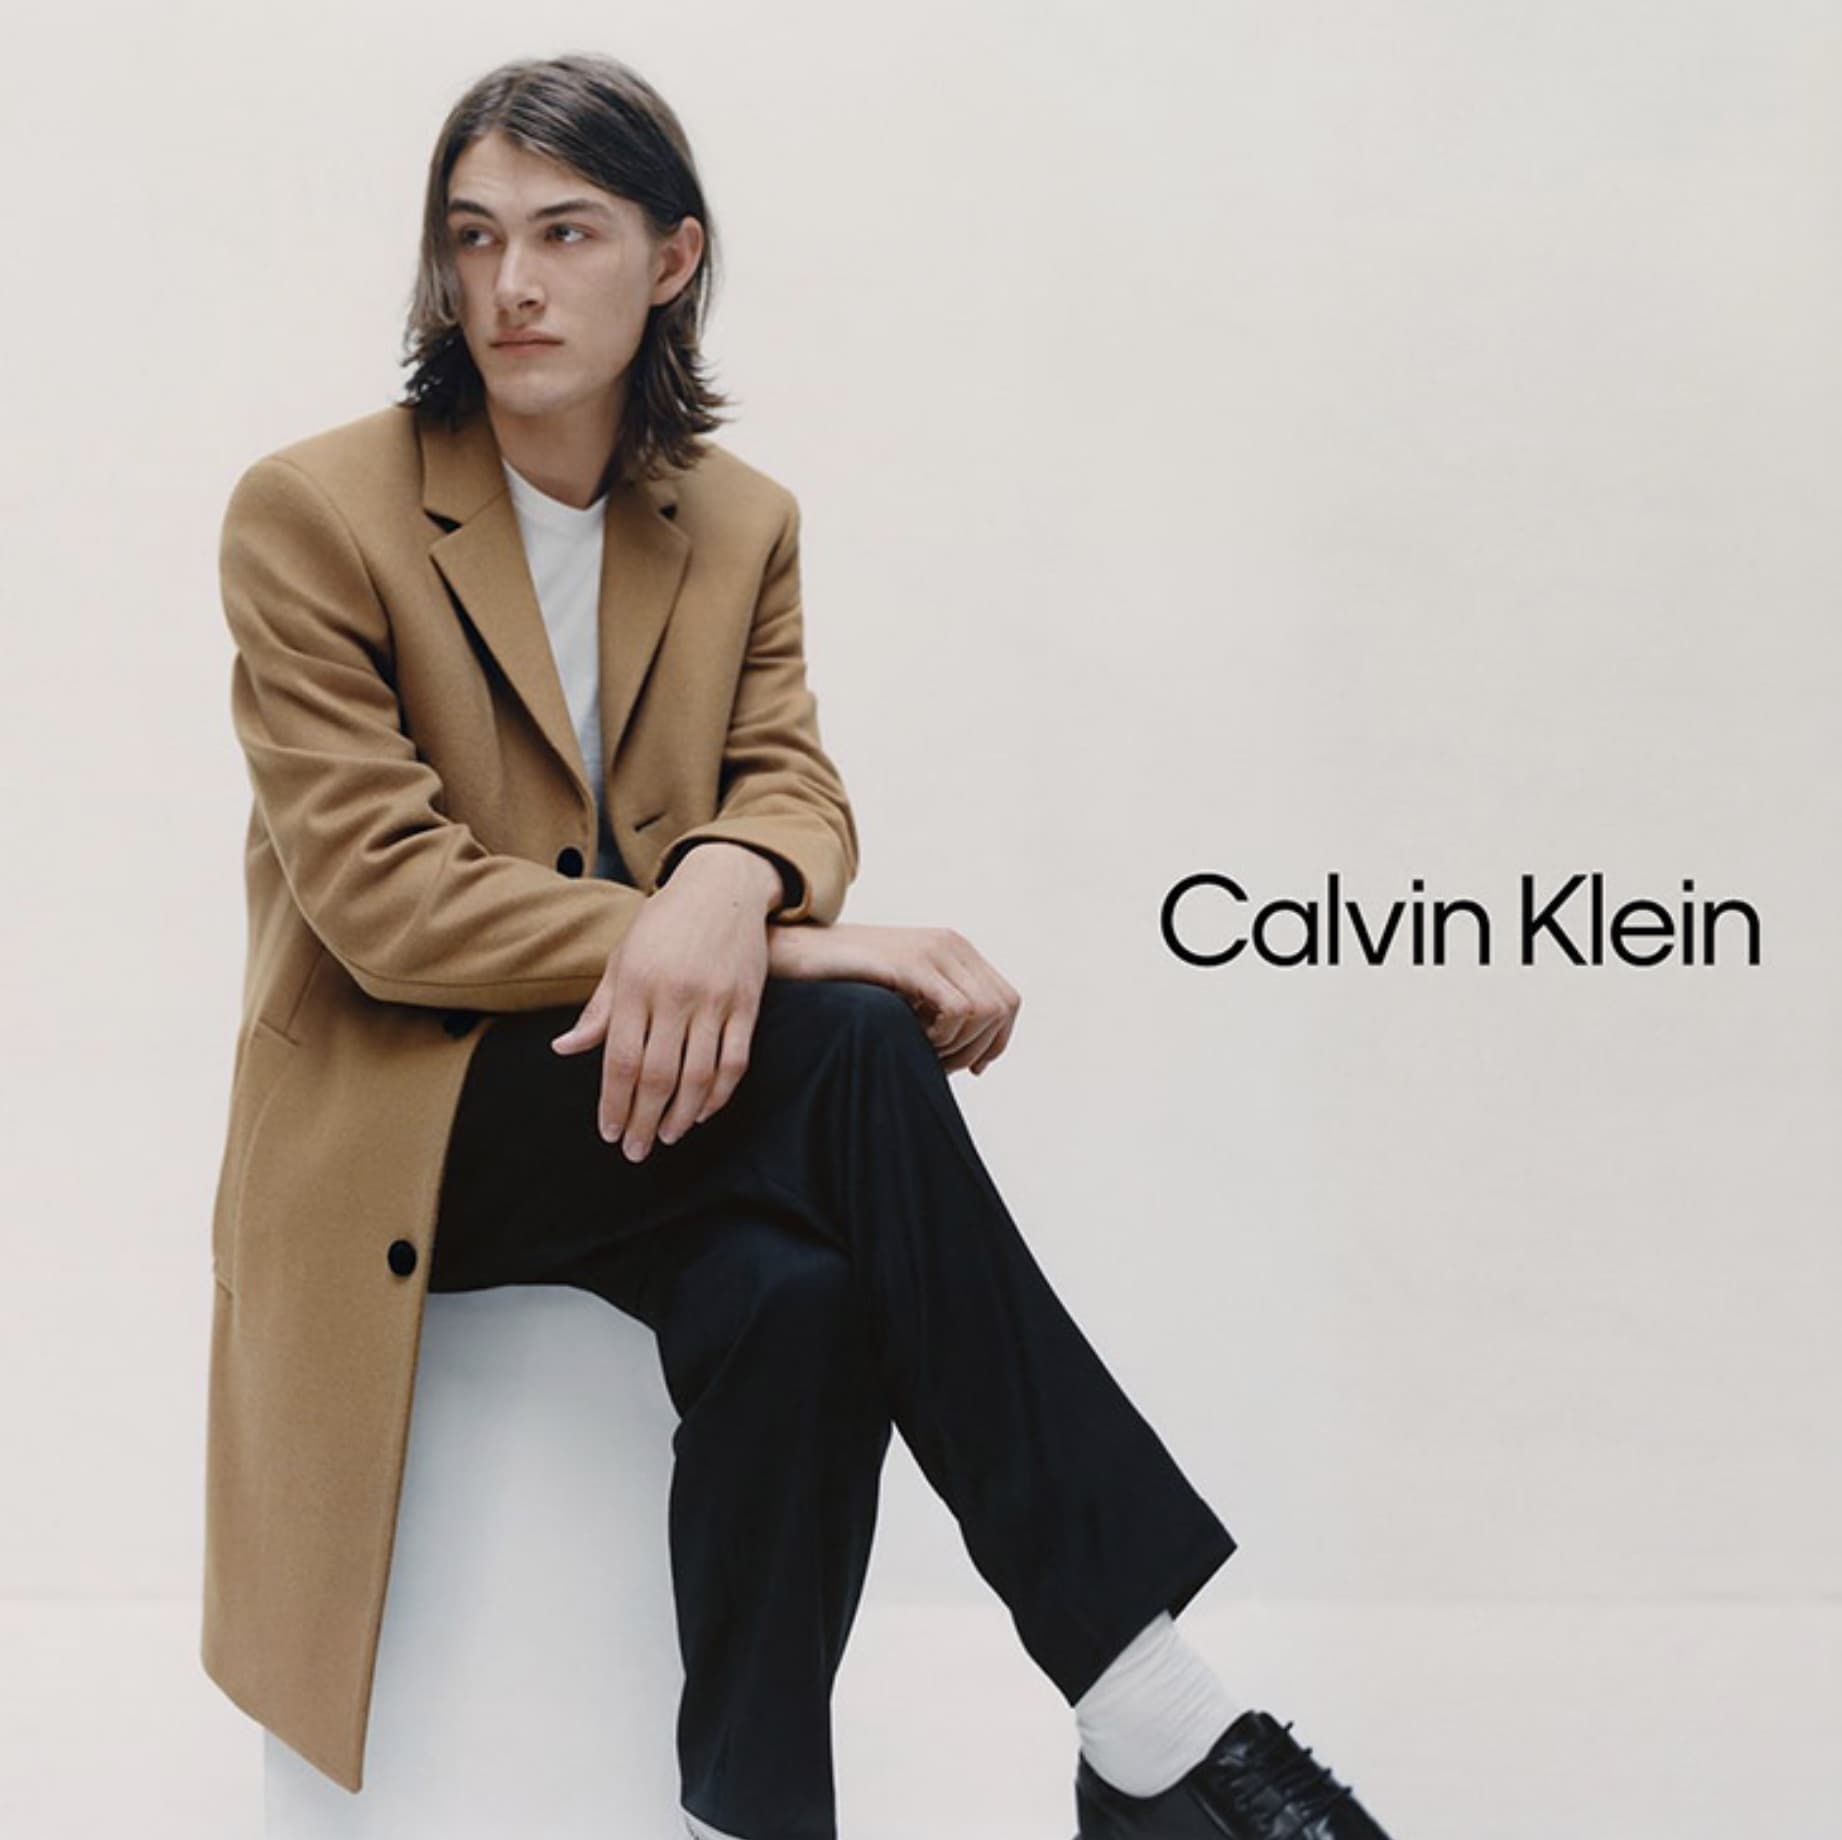 Calvin Klein Fall 2022 Ad Campaign Review